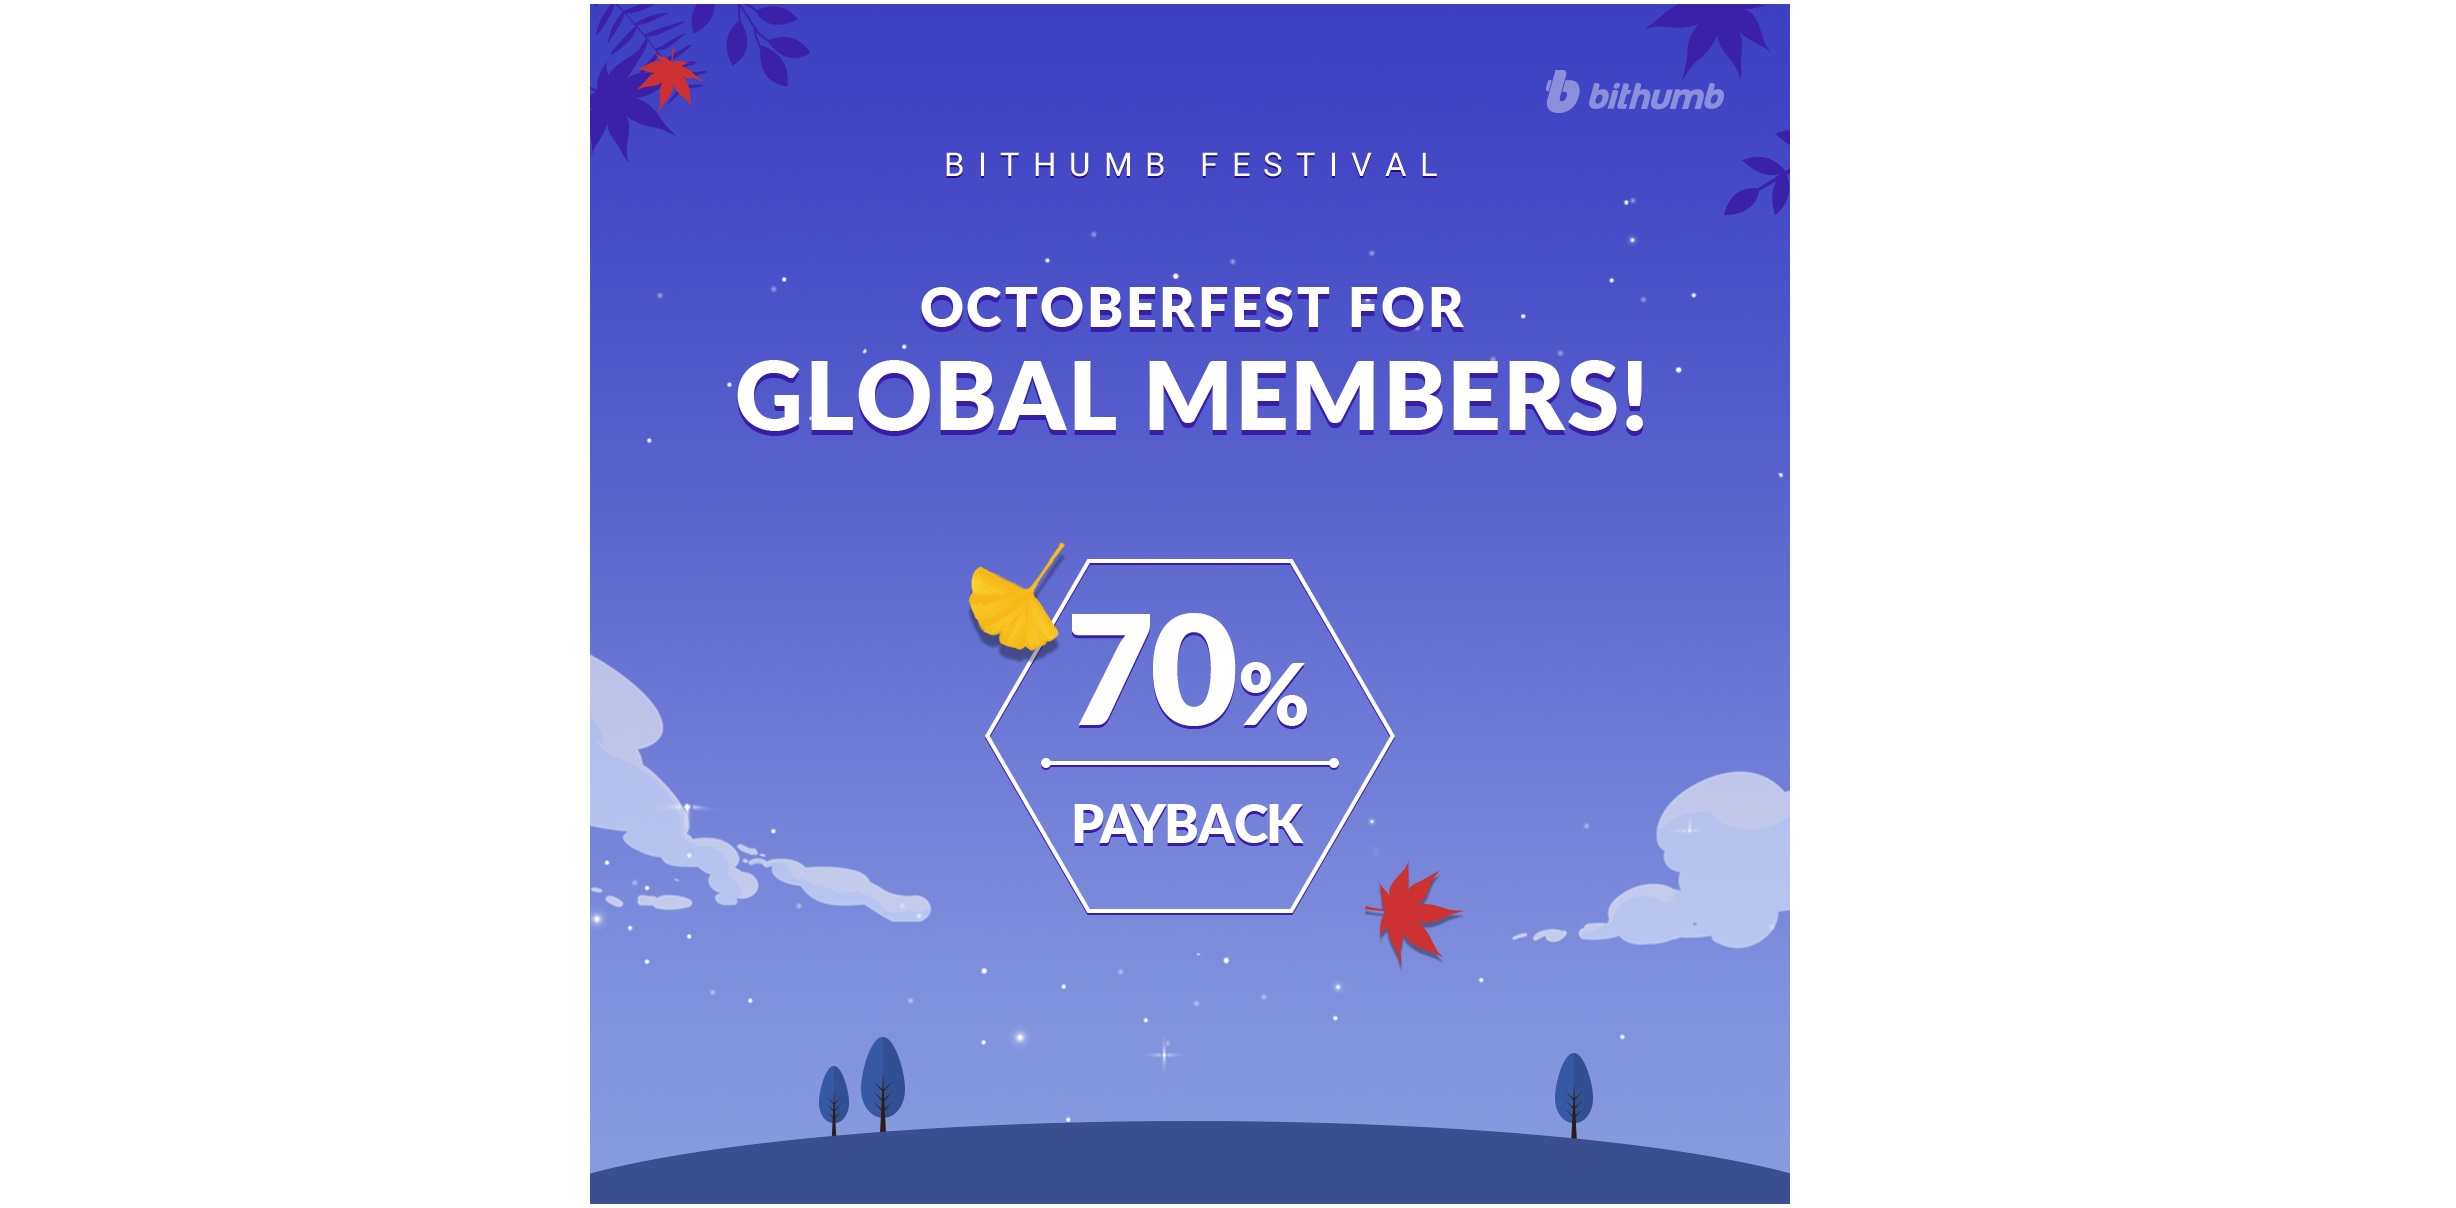 Bithumb to Hold Payback 70% of Transaction Fee for Overseas Users